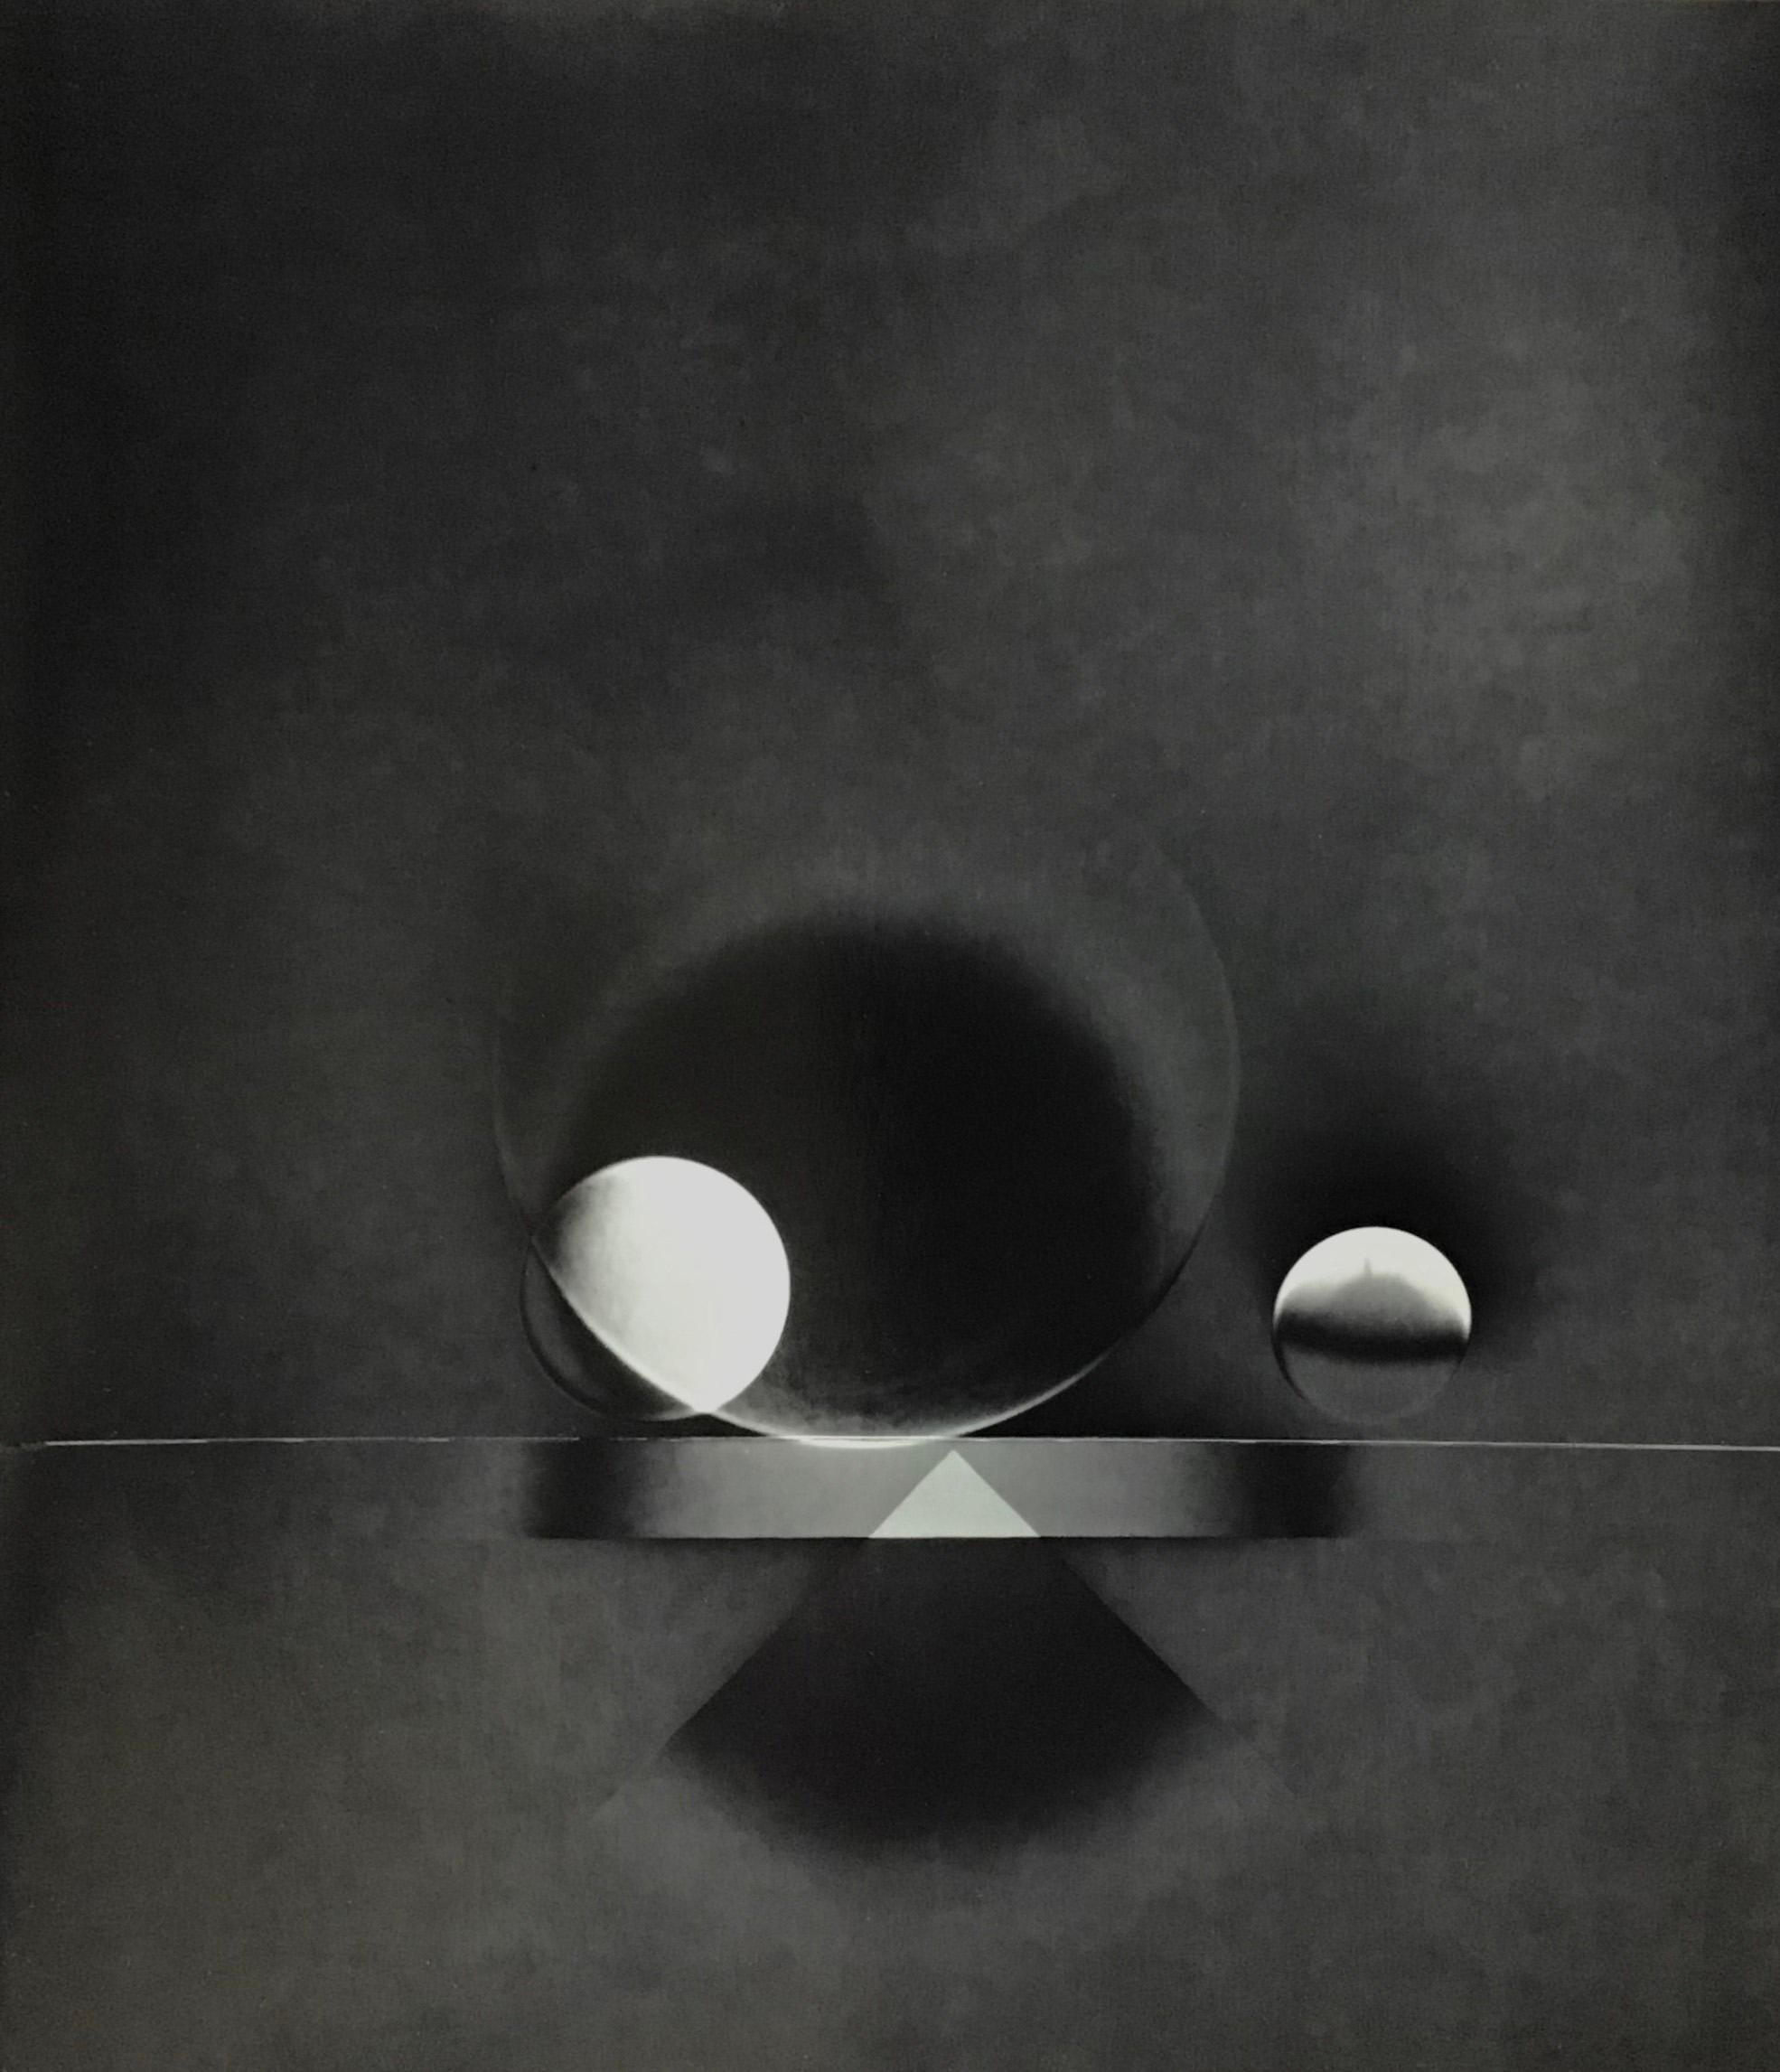 Michael G Jackson  Abstract Print - ATO>MIC #13, Unique Silver Luminogram Print, Two spheres and triangle with shade